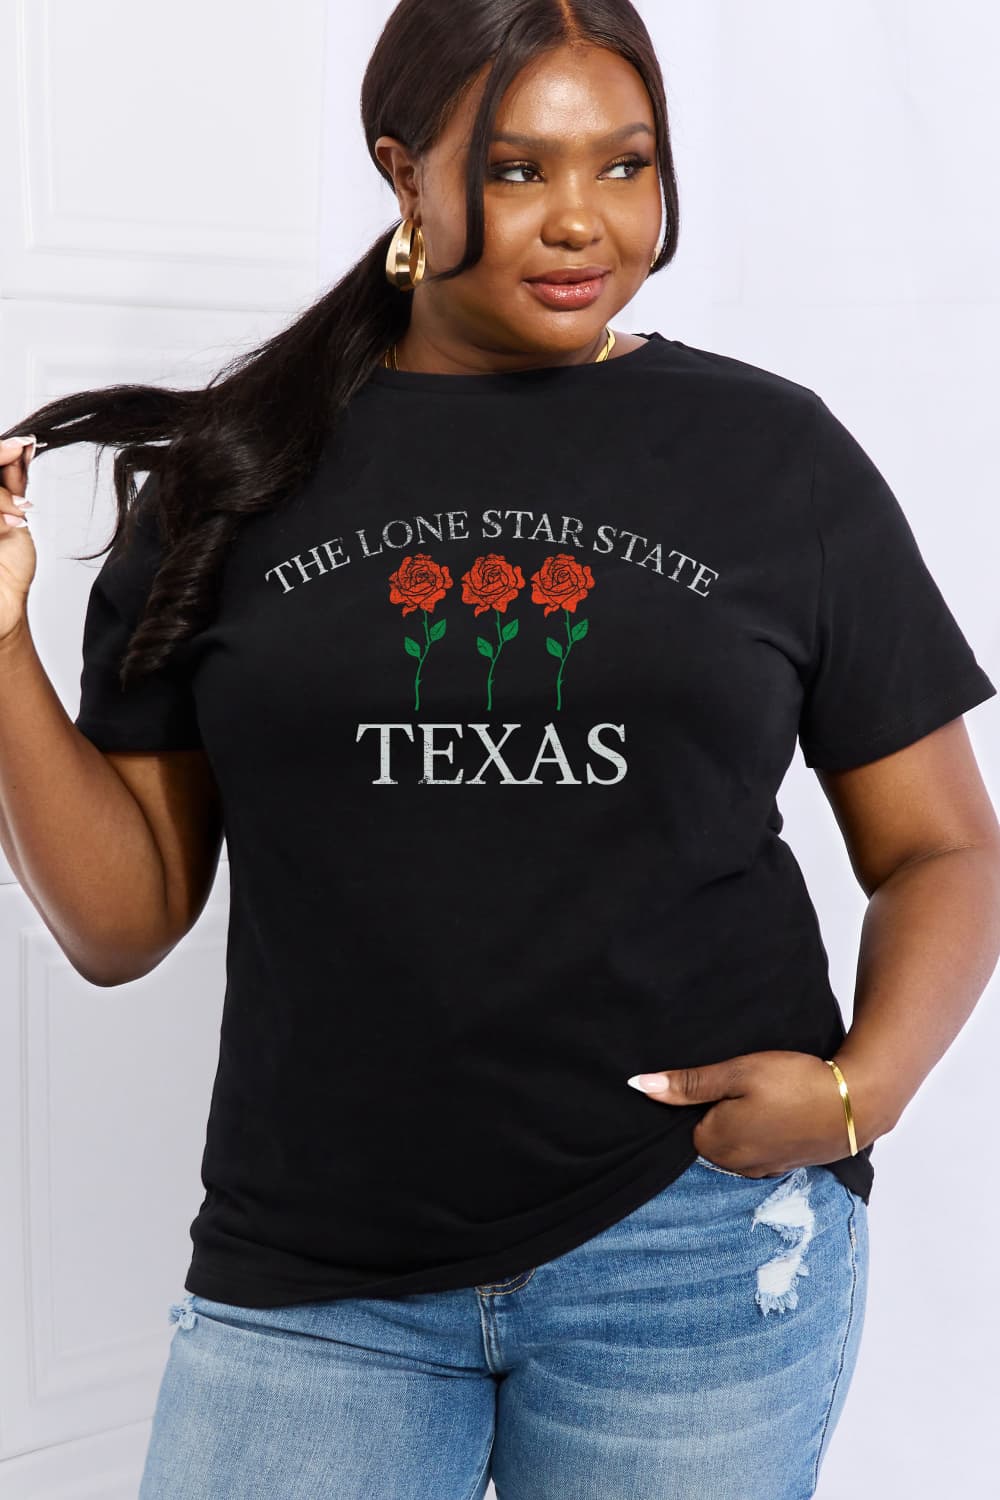 Simply Love Full Size THE LONE STAR STATE TEXAS Graphic Cotton Tee